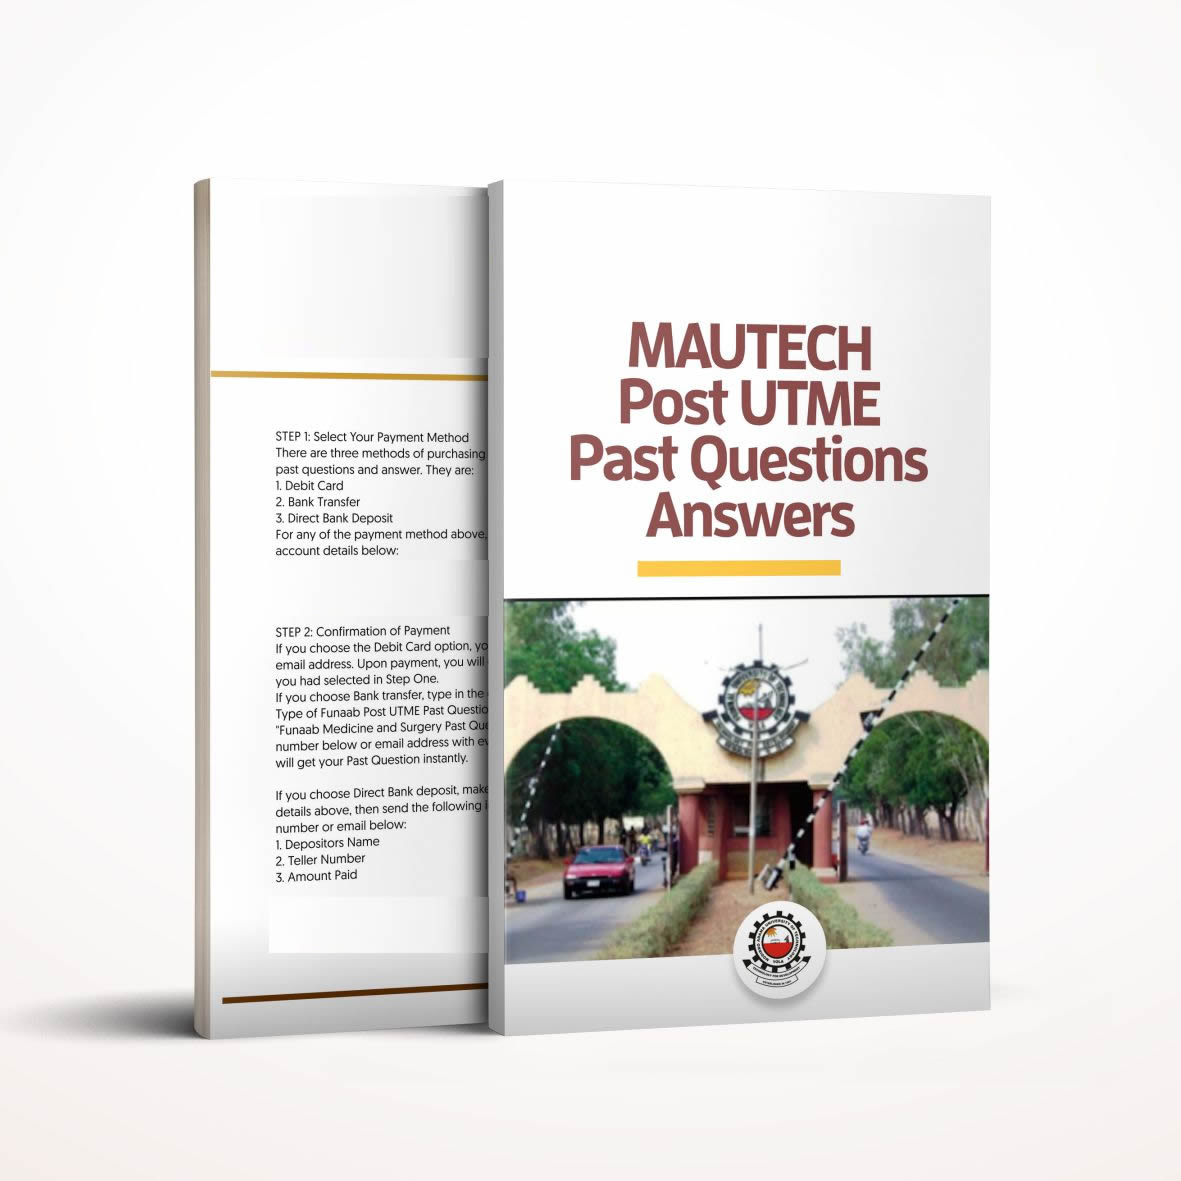 MAUTECH Post UTME past questions and answers